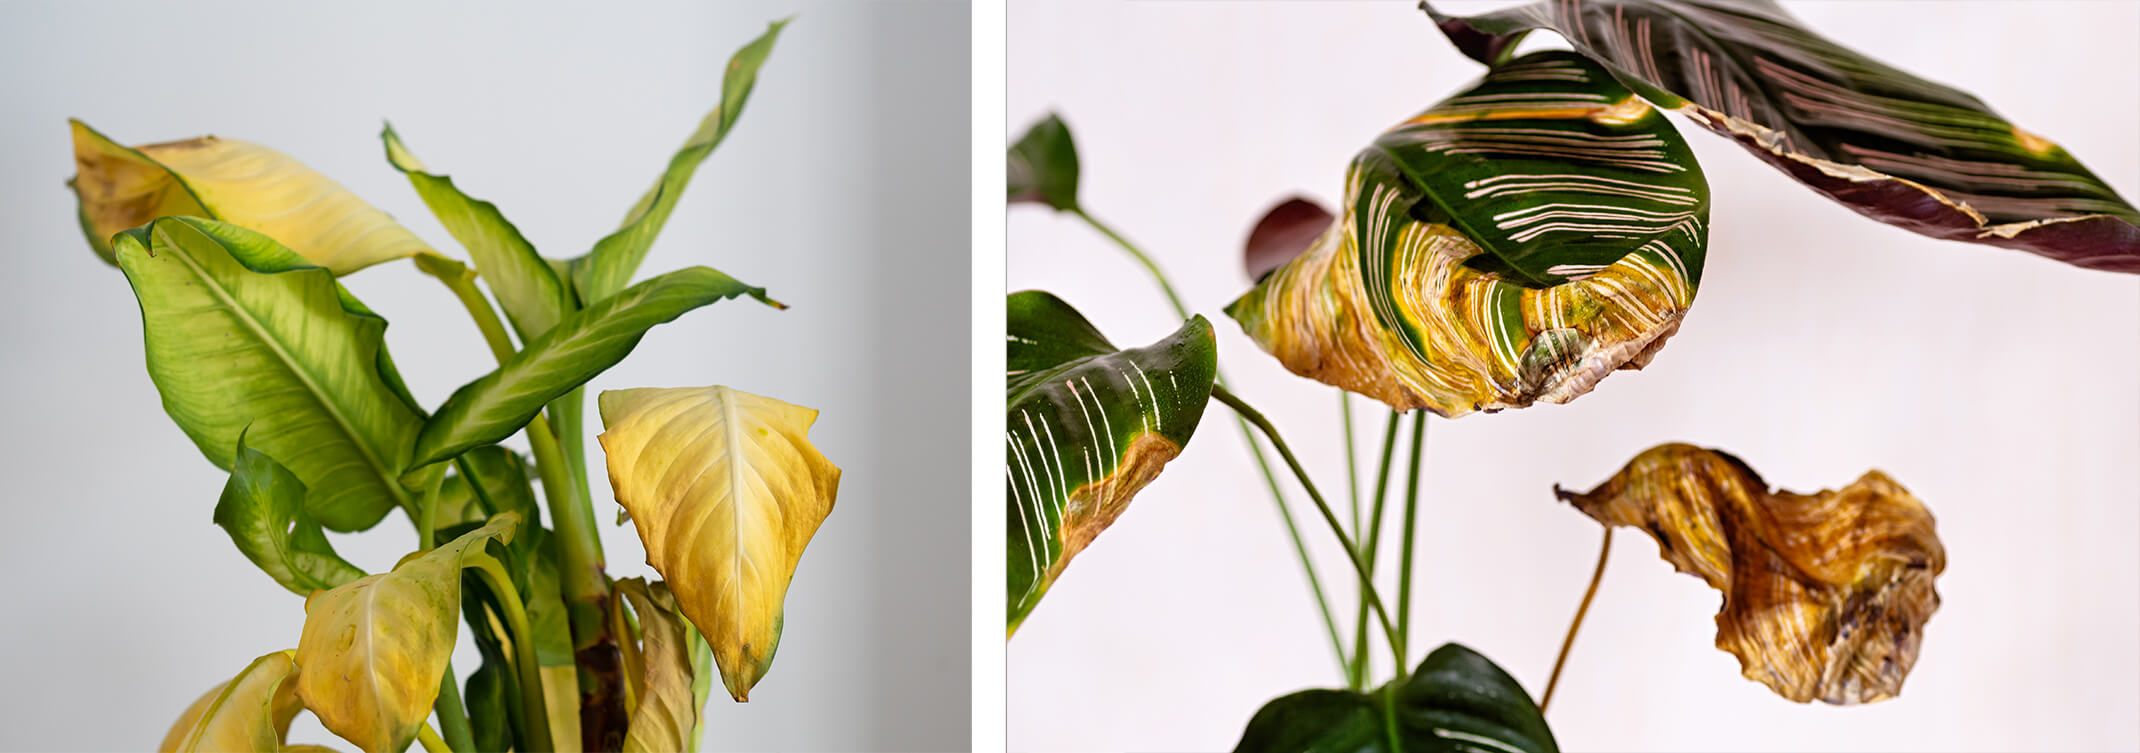 2 images: a closeup of an overwatered houseplant with yellowing leaves, and a closeup of an underwatered houseplant with yellow, crispy leaves